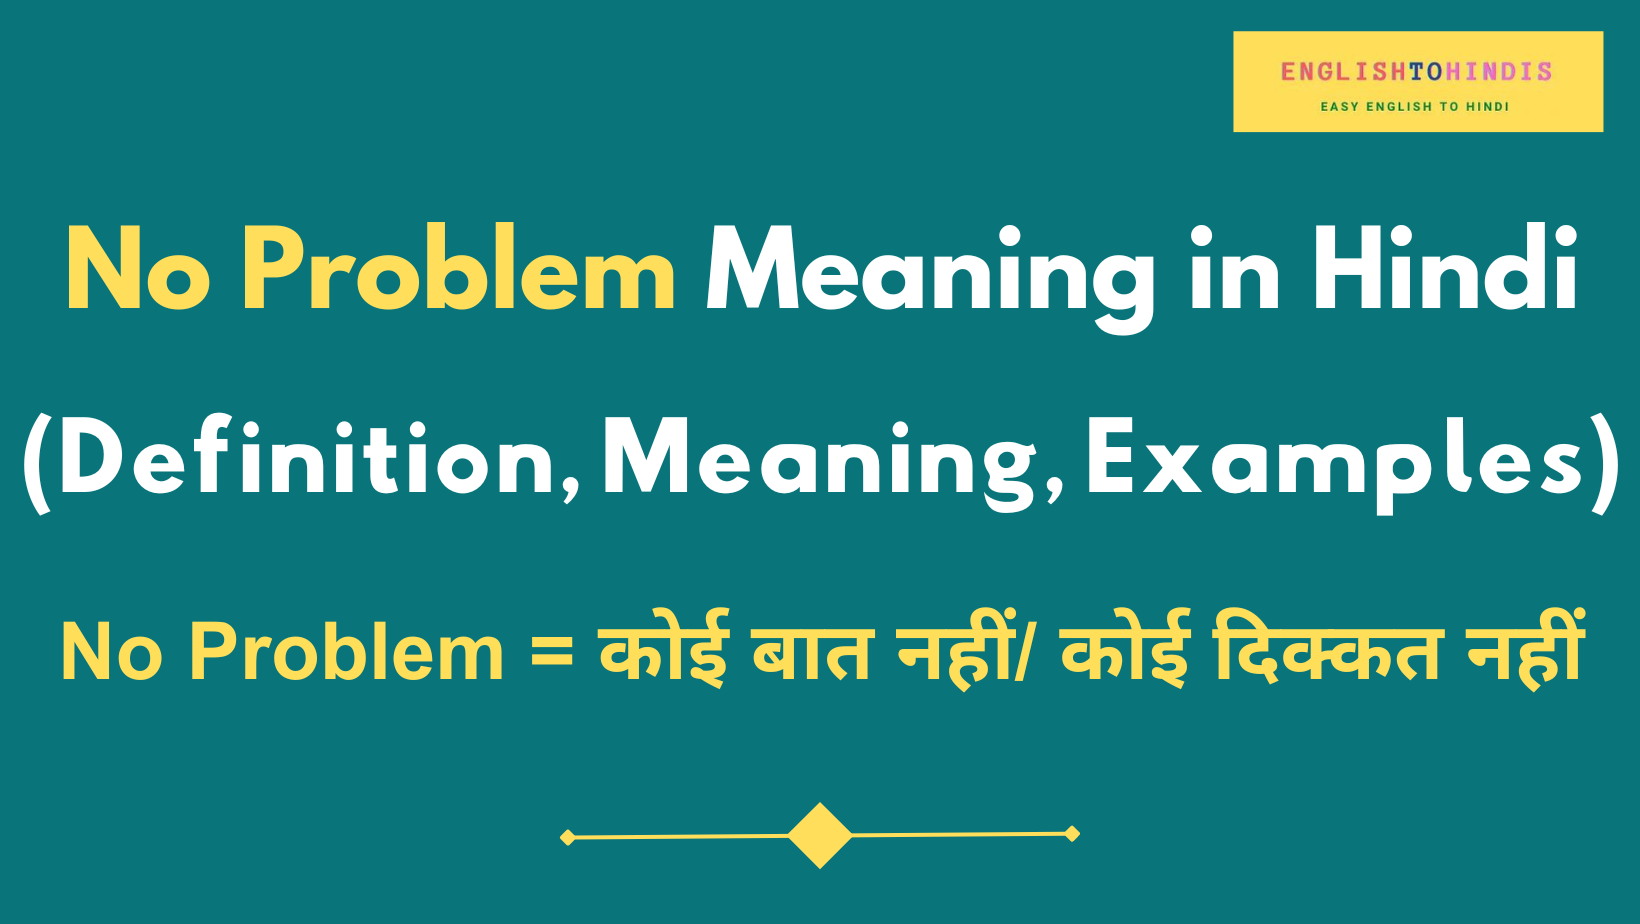 No Problem Meaning in Hindi